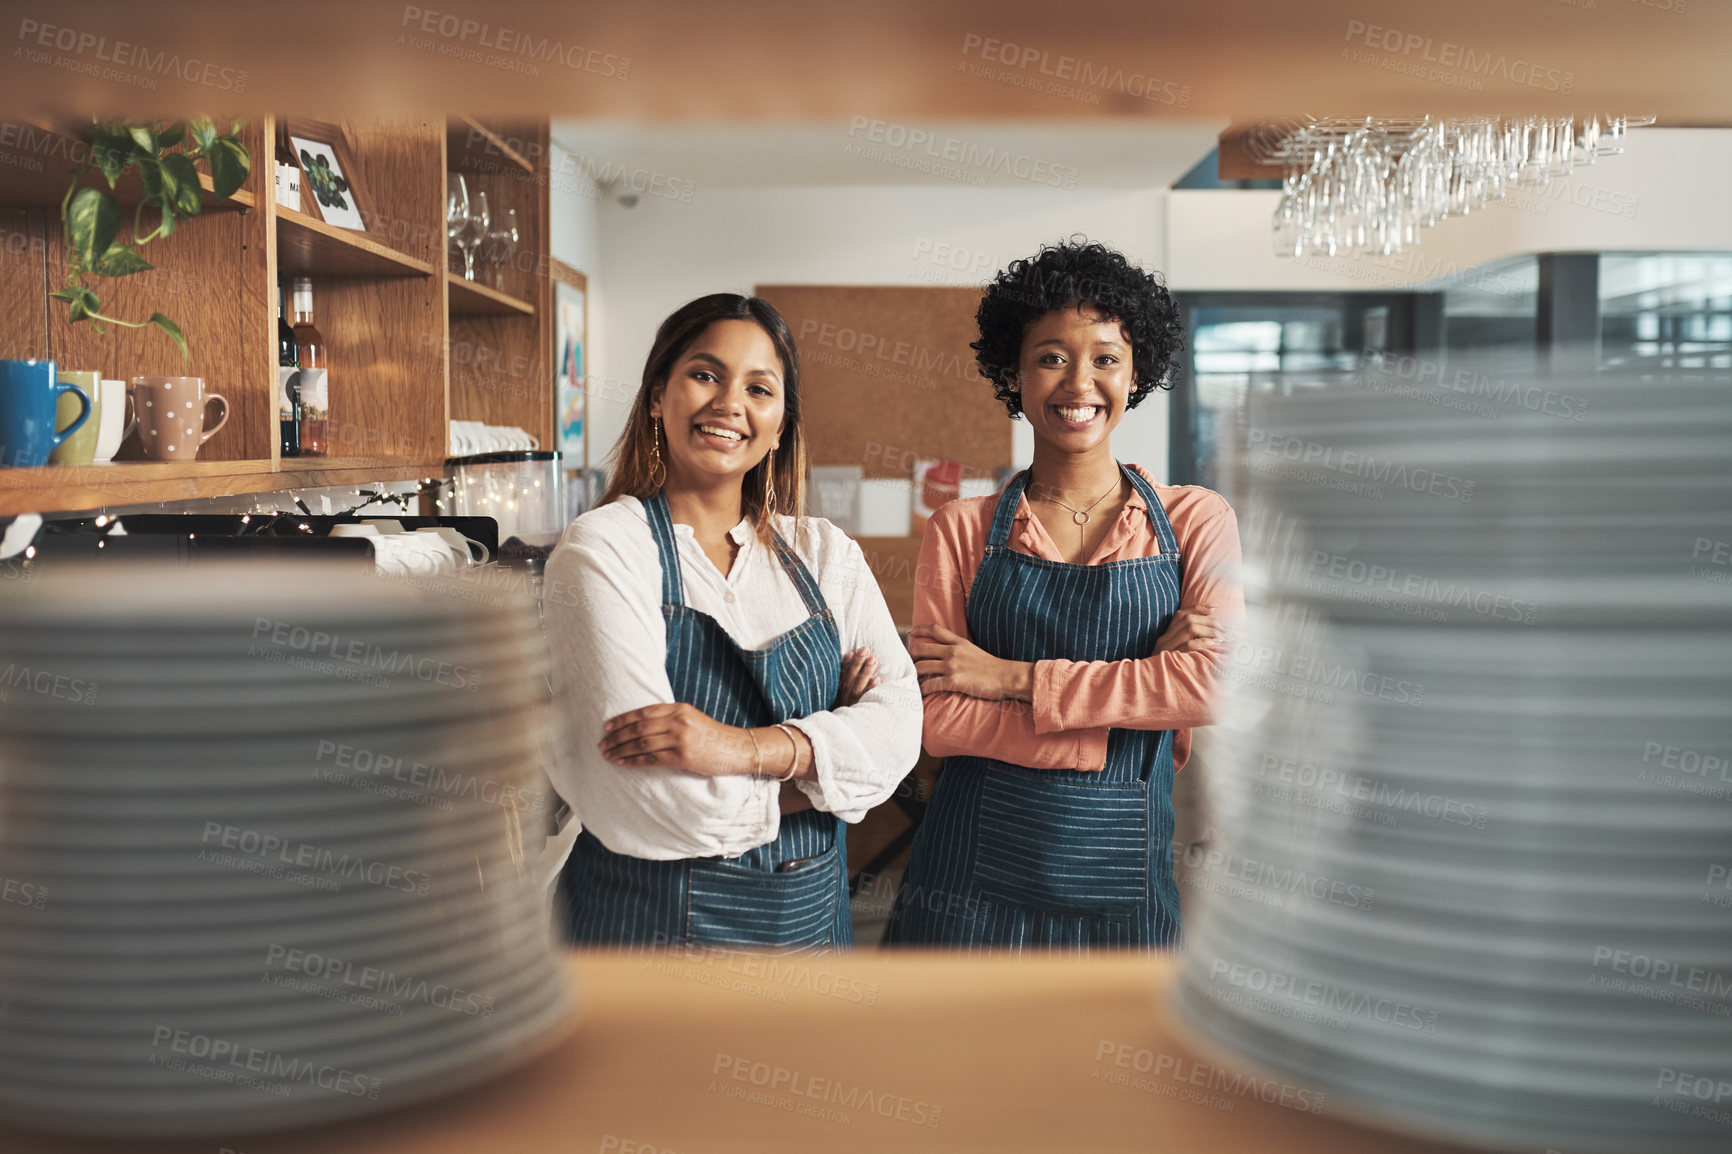 Buy stock photo Cropped shot of two young women working in a cafe